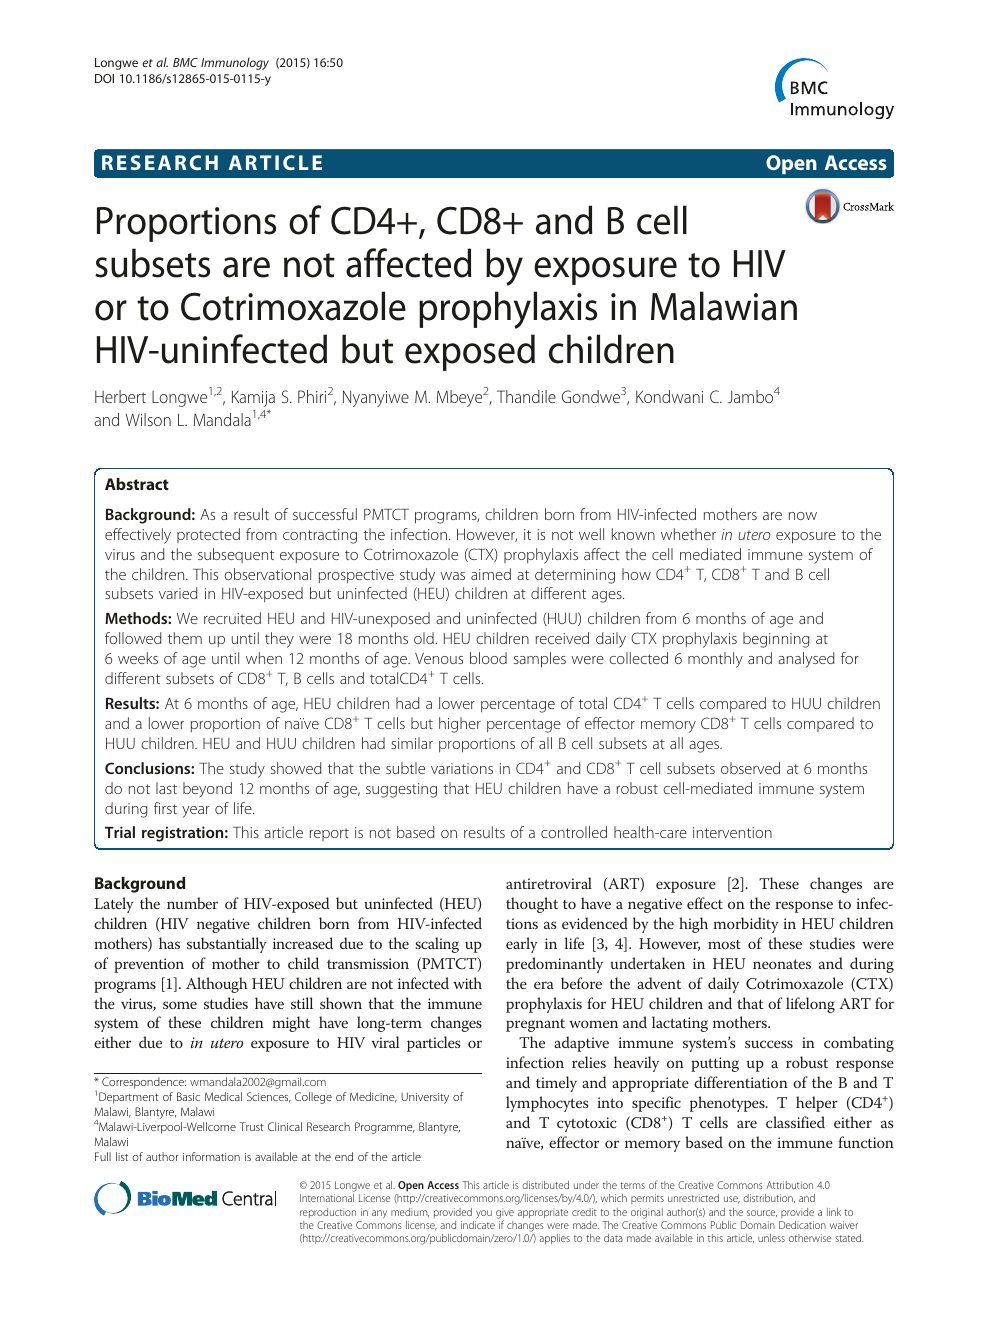 Proportions Of Cd4 Cd8 And B Cell Subsets Are Not Affected By Exposure To Hiv Or To Cotrimoxazole Prophylaxis In Malawian Hiv Uninfected But Exposed Children Topic Of Research Paper In Veterinary